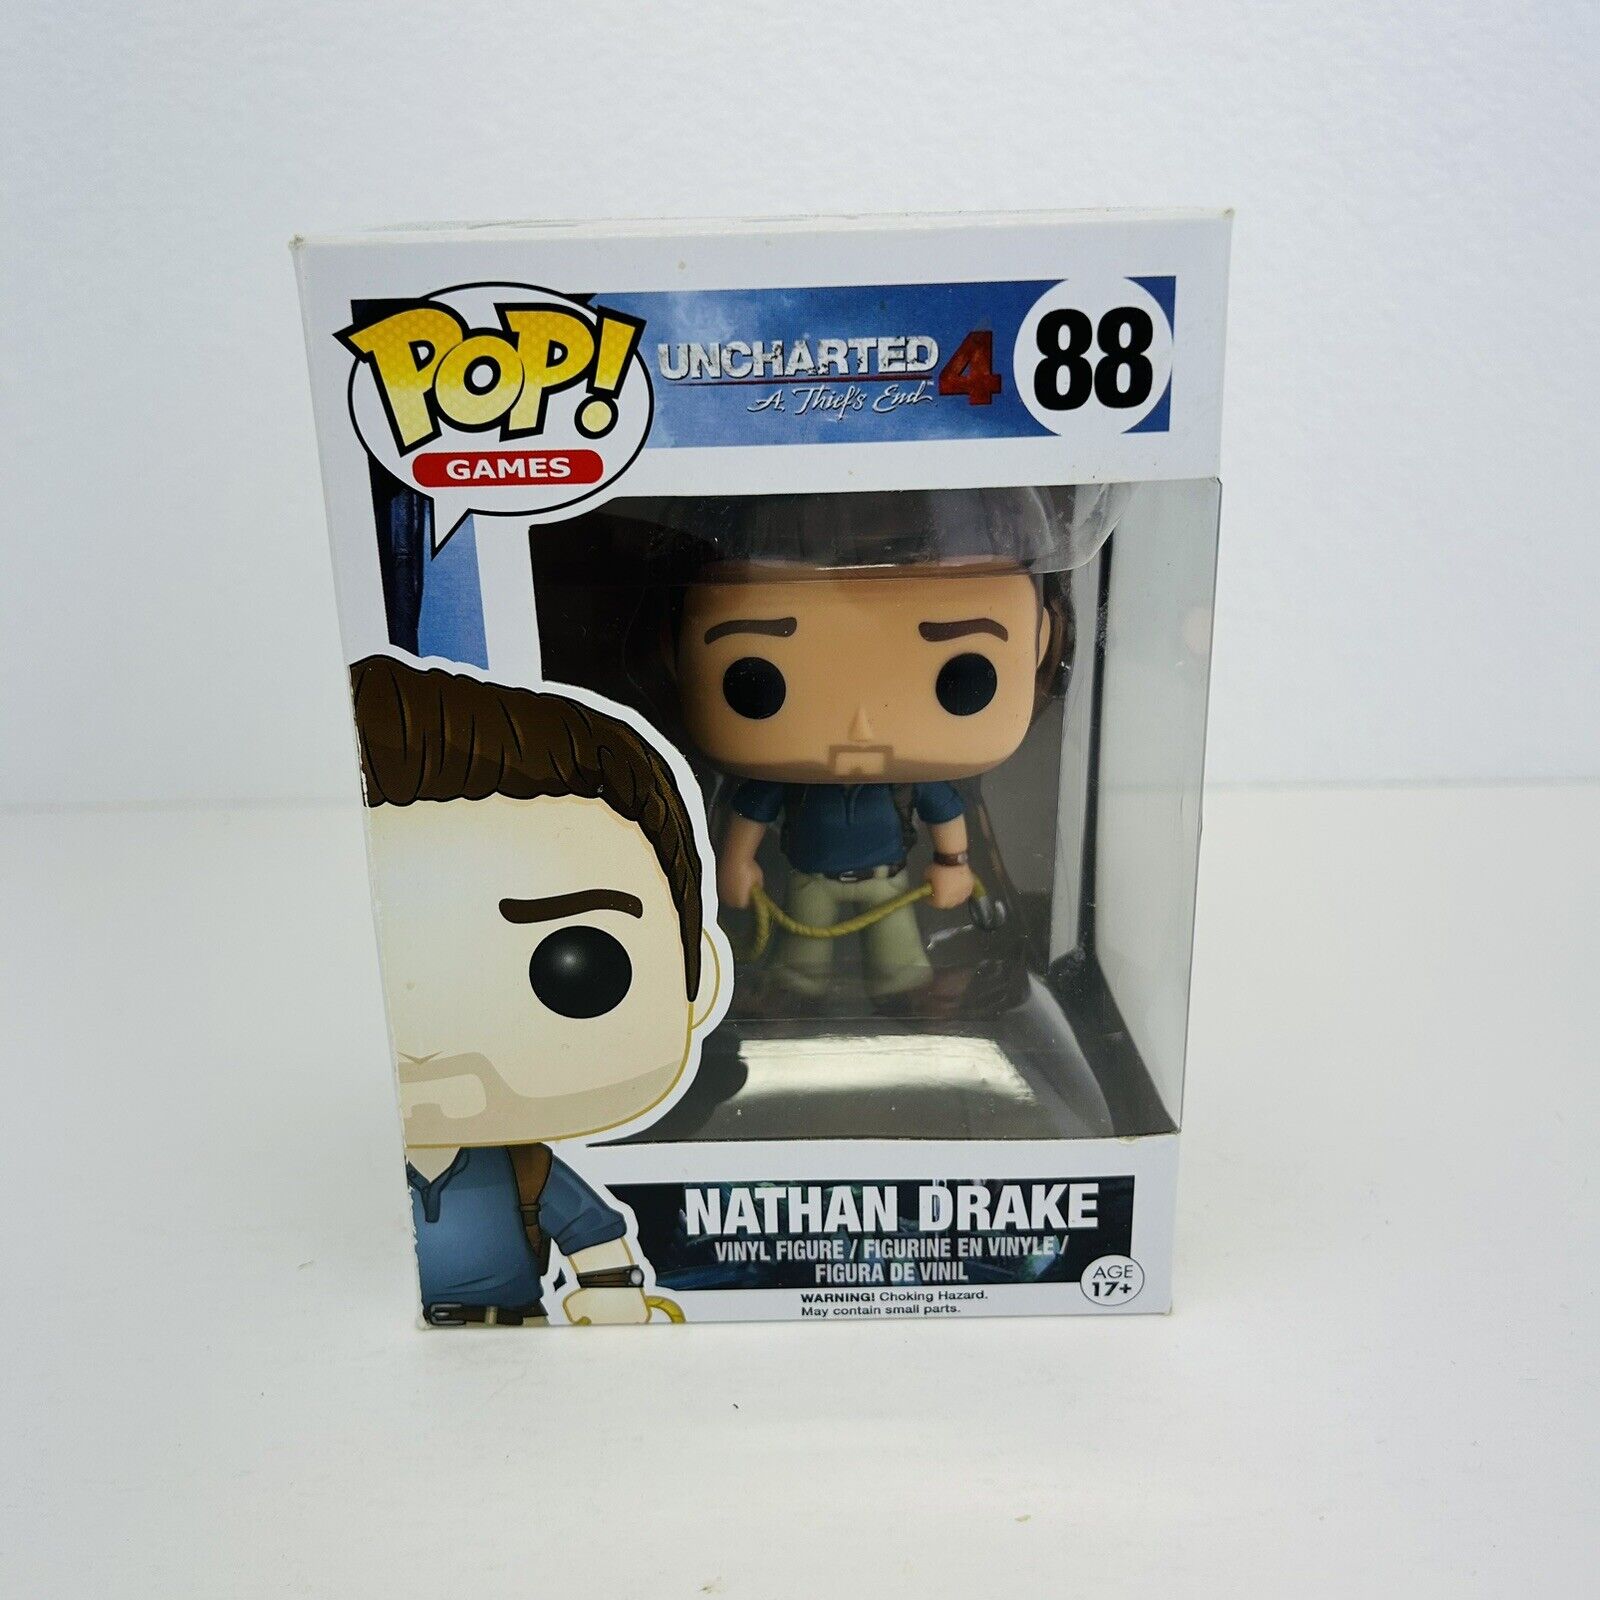 Funko Pop Games Uncharted A Thief's End NATHAN DRAKE 88 Vinyl Figure